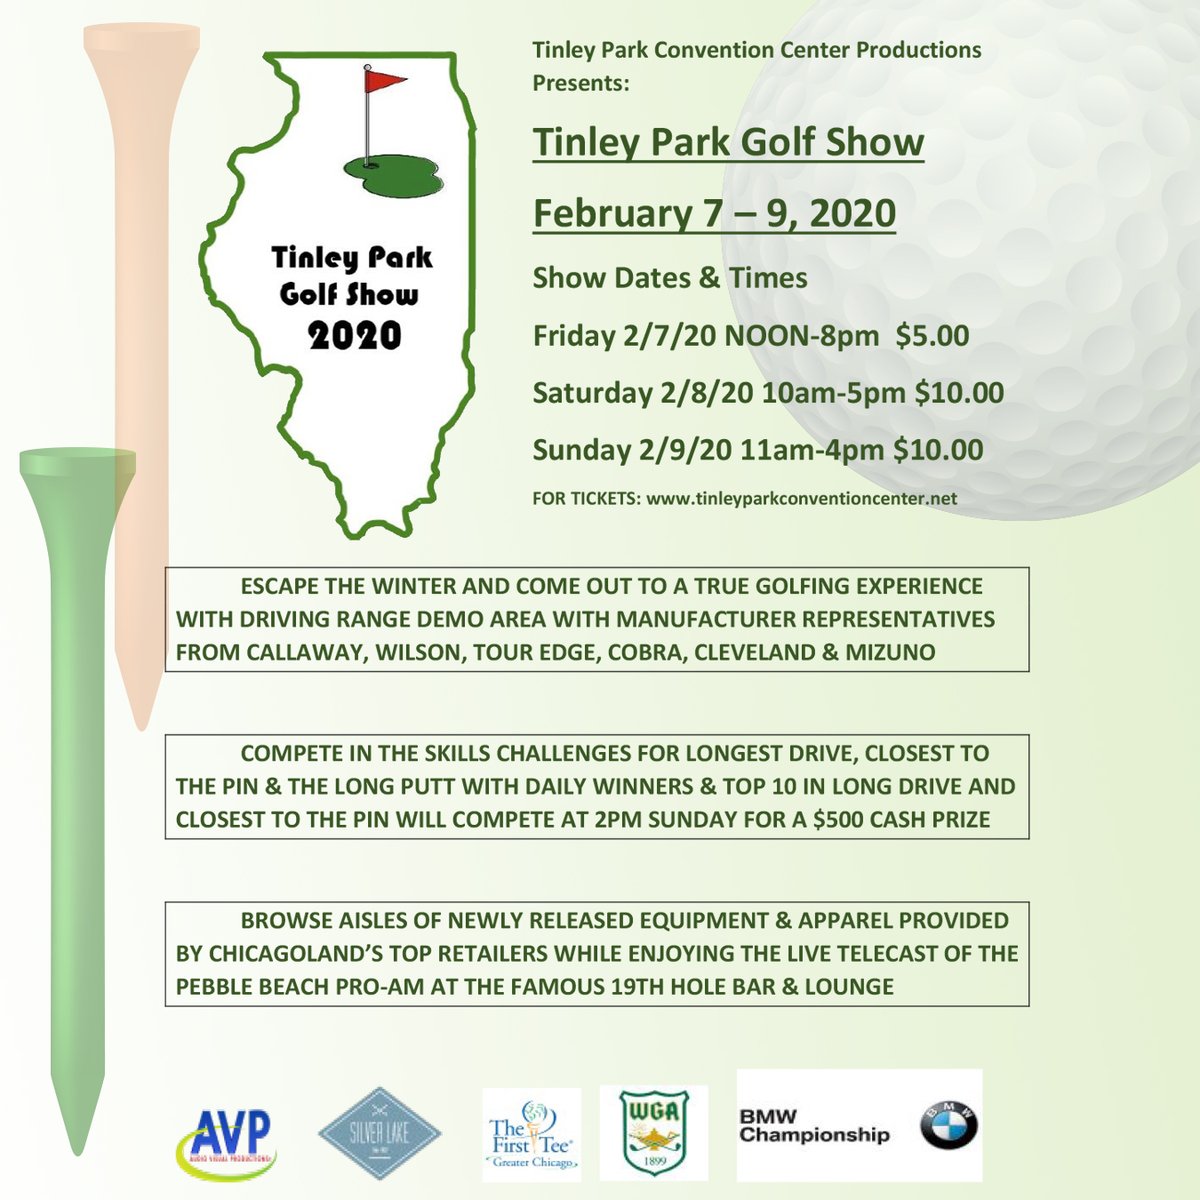 Schedule your mid-winter stretch & think spring as you escape, compete and browse at the @TinleyParkCC coming up in February! #VisitSouthland, #EnjoyIllinois, #GetOutside, #TinleyPark